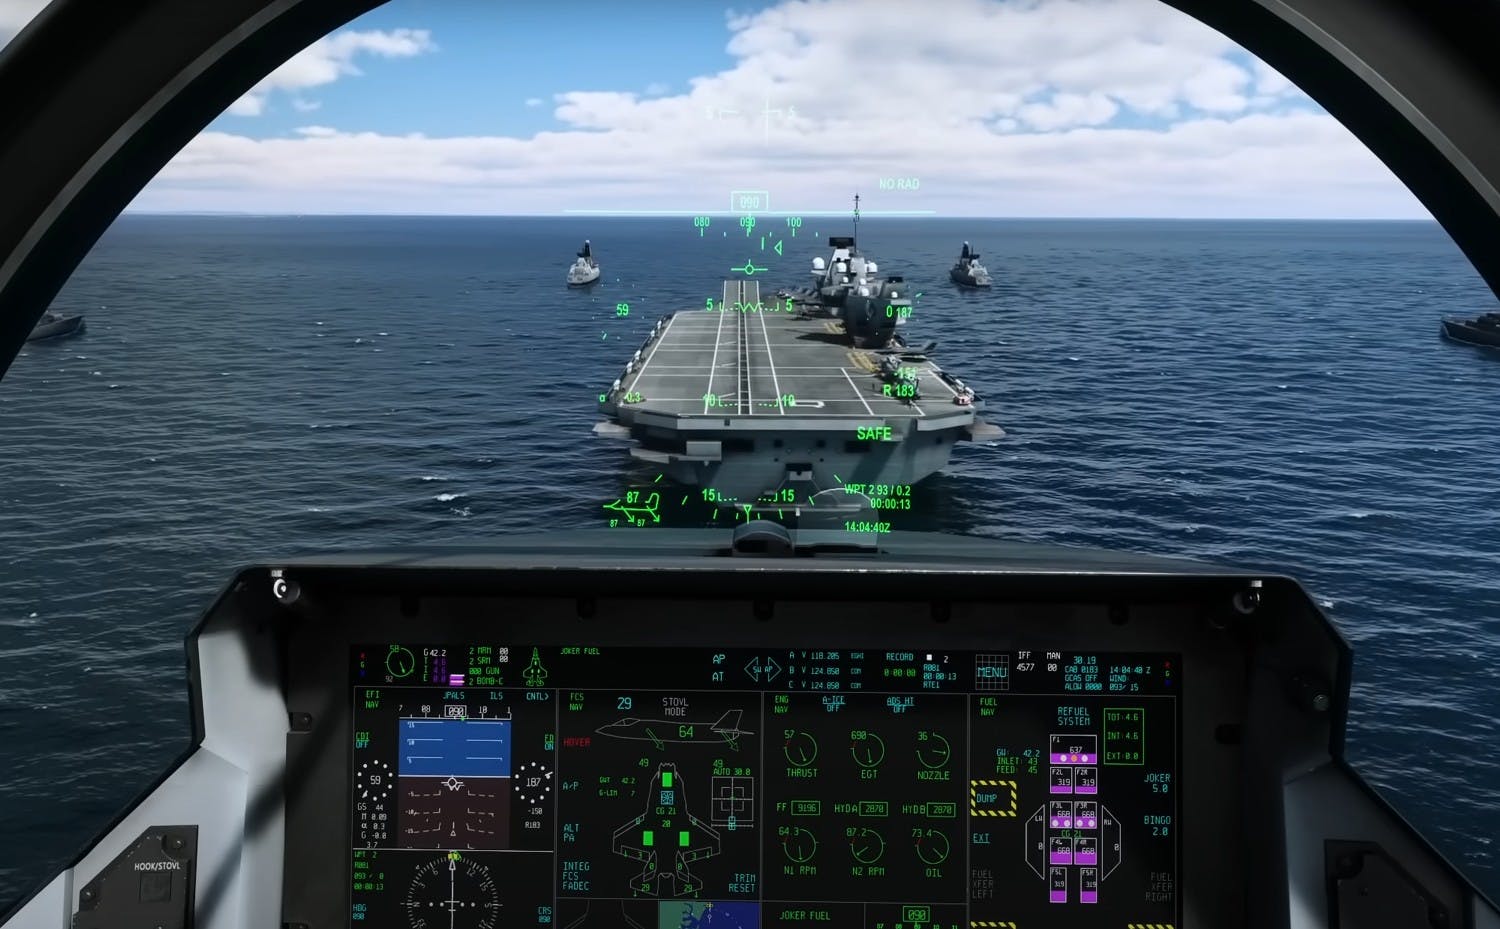 Here’s how to land an F-35B jet on HMS Queen Elizabeth